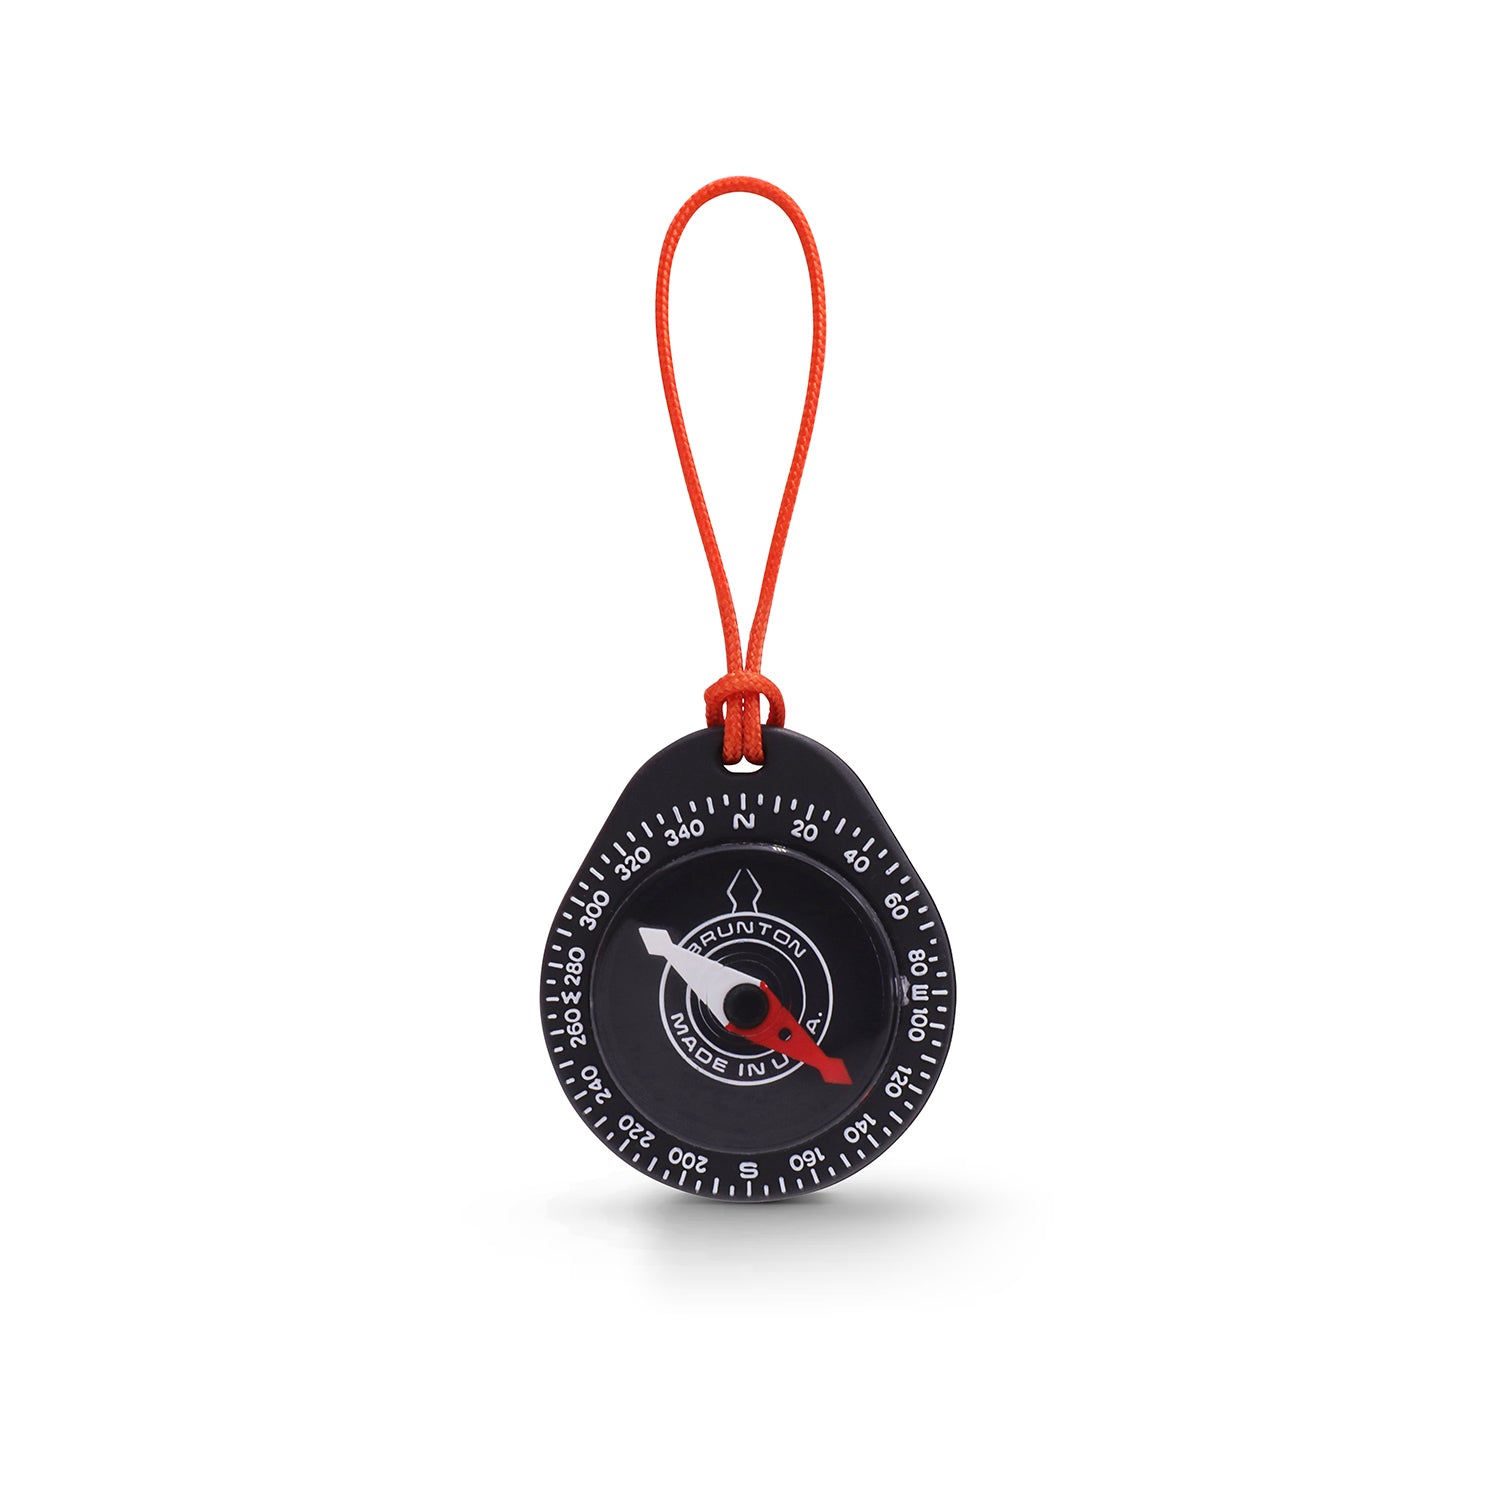 ZGJHFF Multifunctional Outdoor Survival Compass Camping Geological Compass  Digital Navigation Device (Color : E, Size : 95mm*66mm)